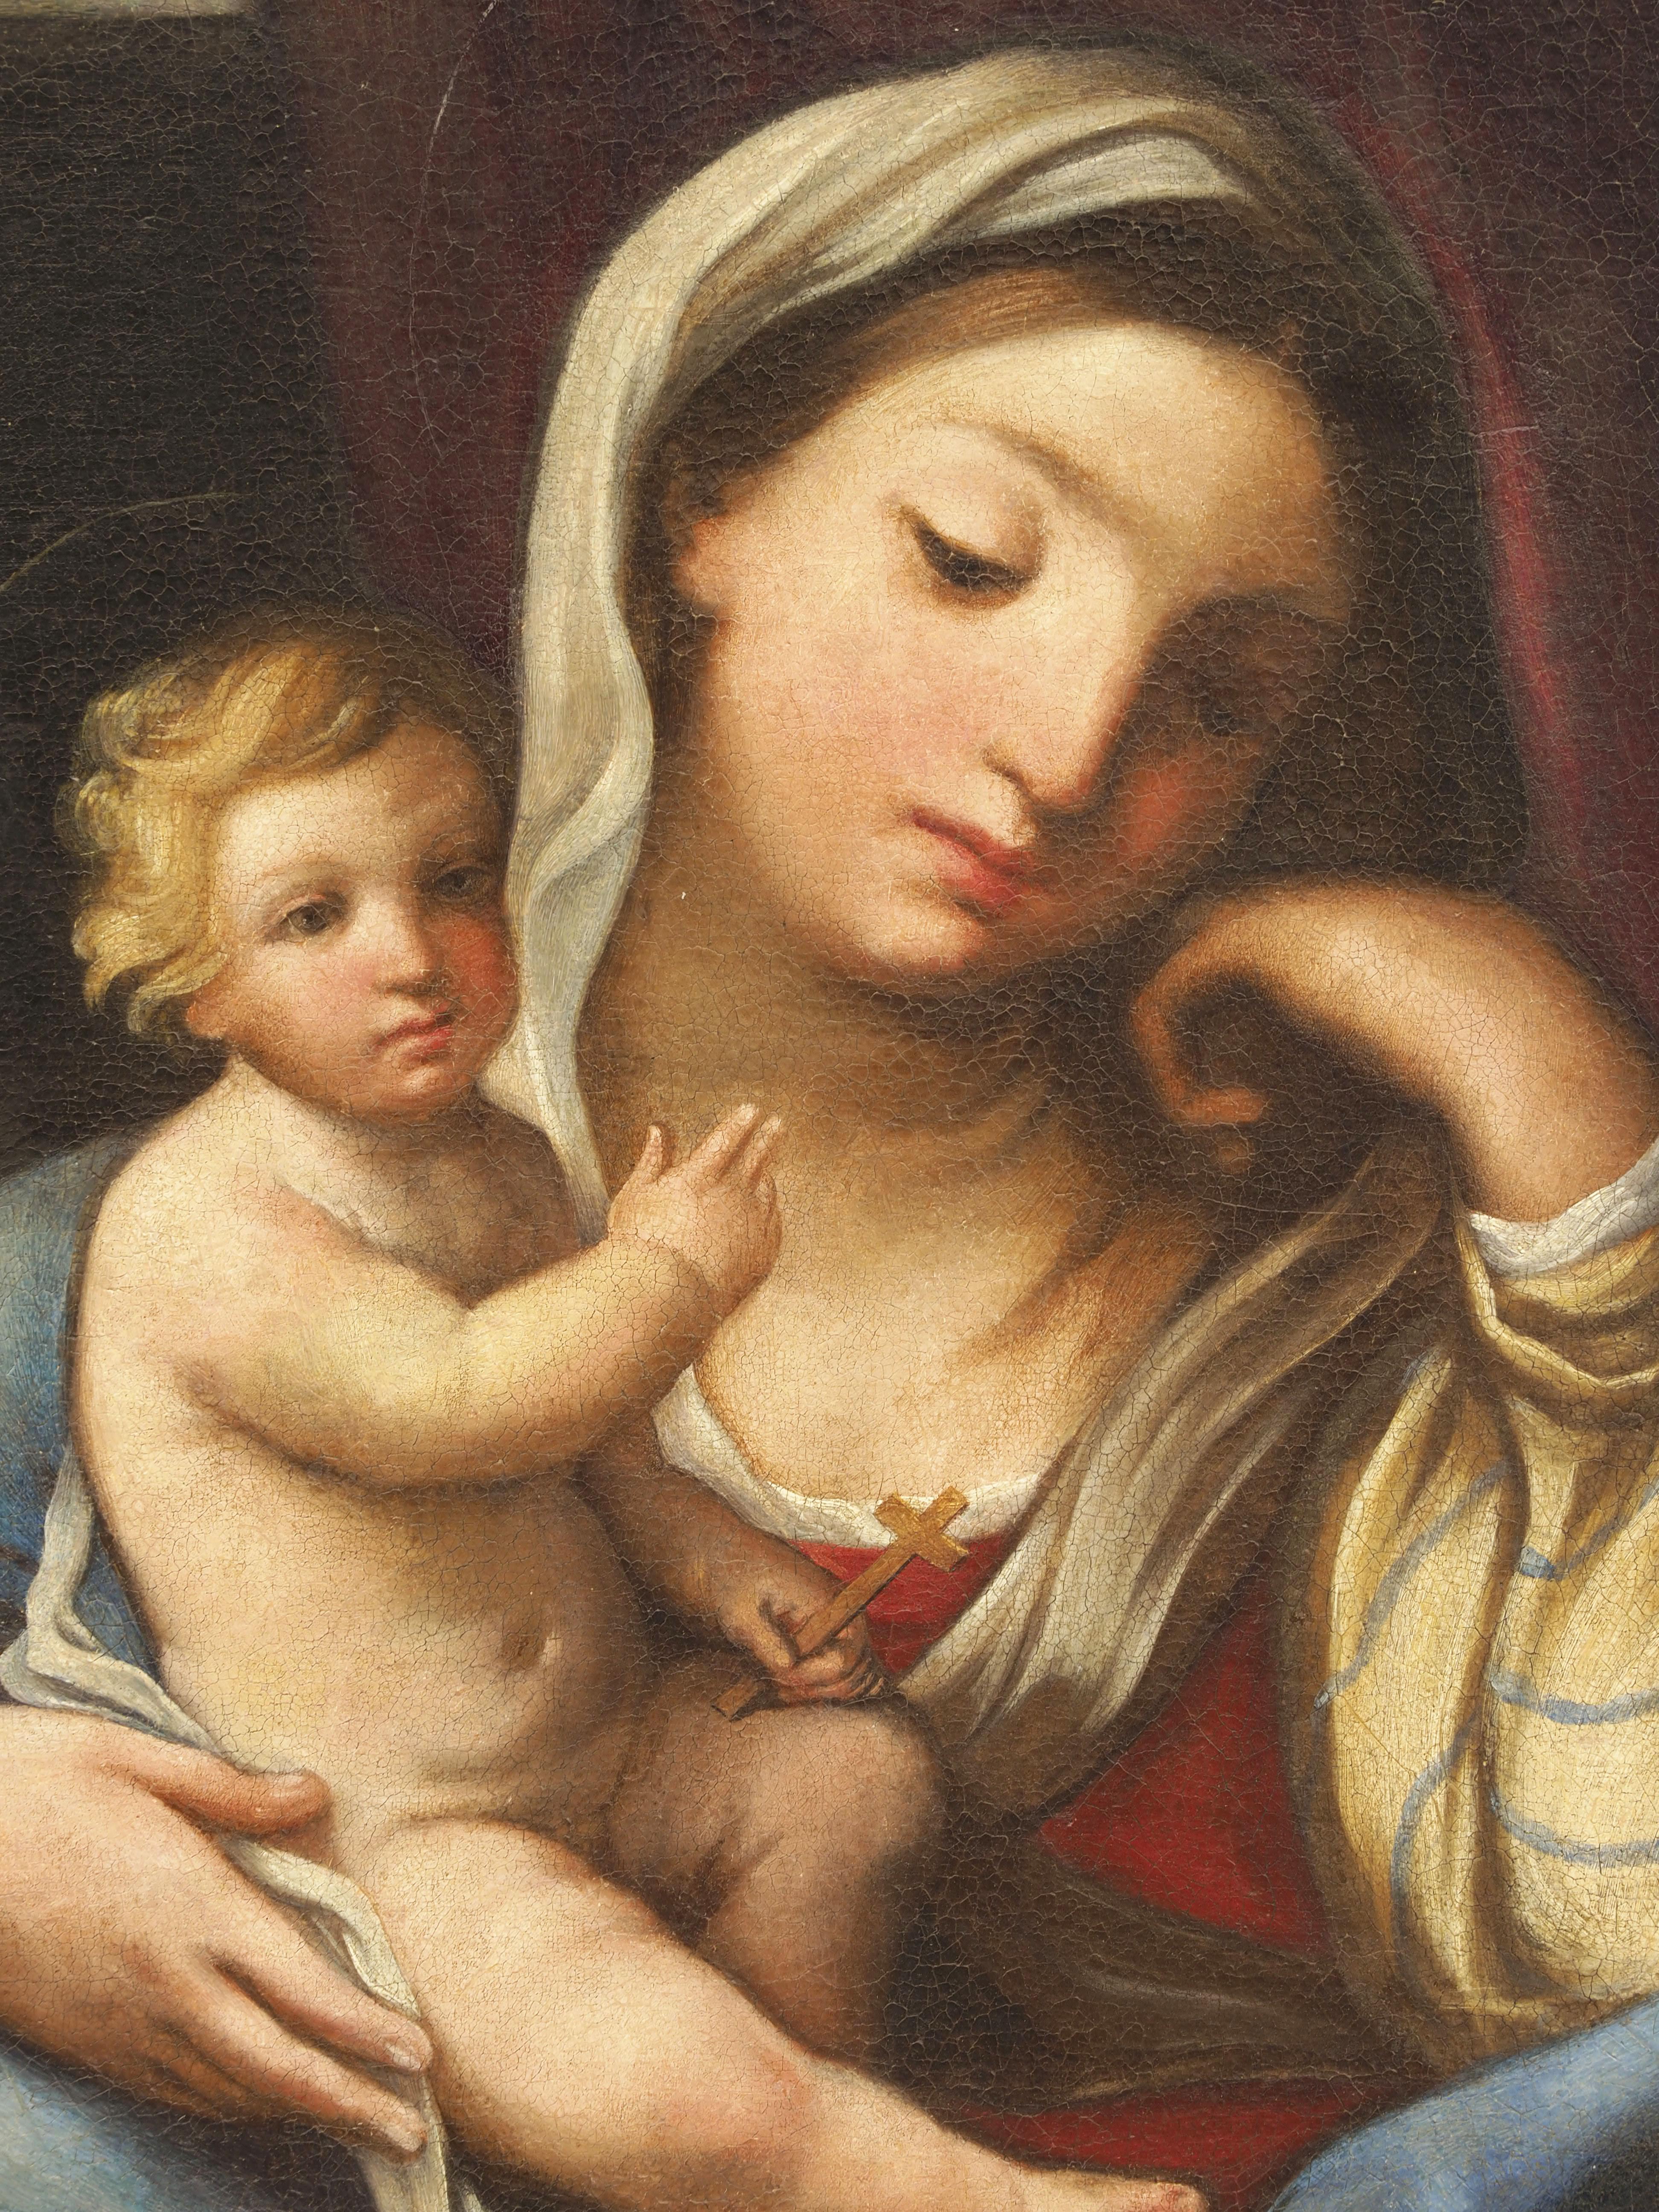 Roman School of Italian painting Madonna and Child early XVIII century
Created by an artist of the Roman School of Italian painting in the early XVIII century, this exceptionally preserved artwork was part of a private collection, thus it has never